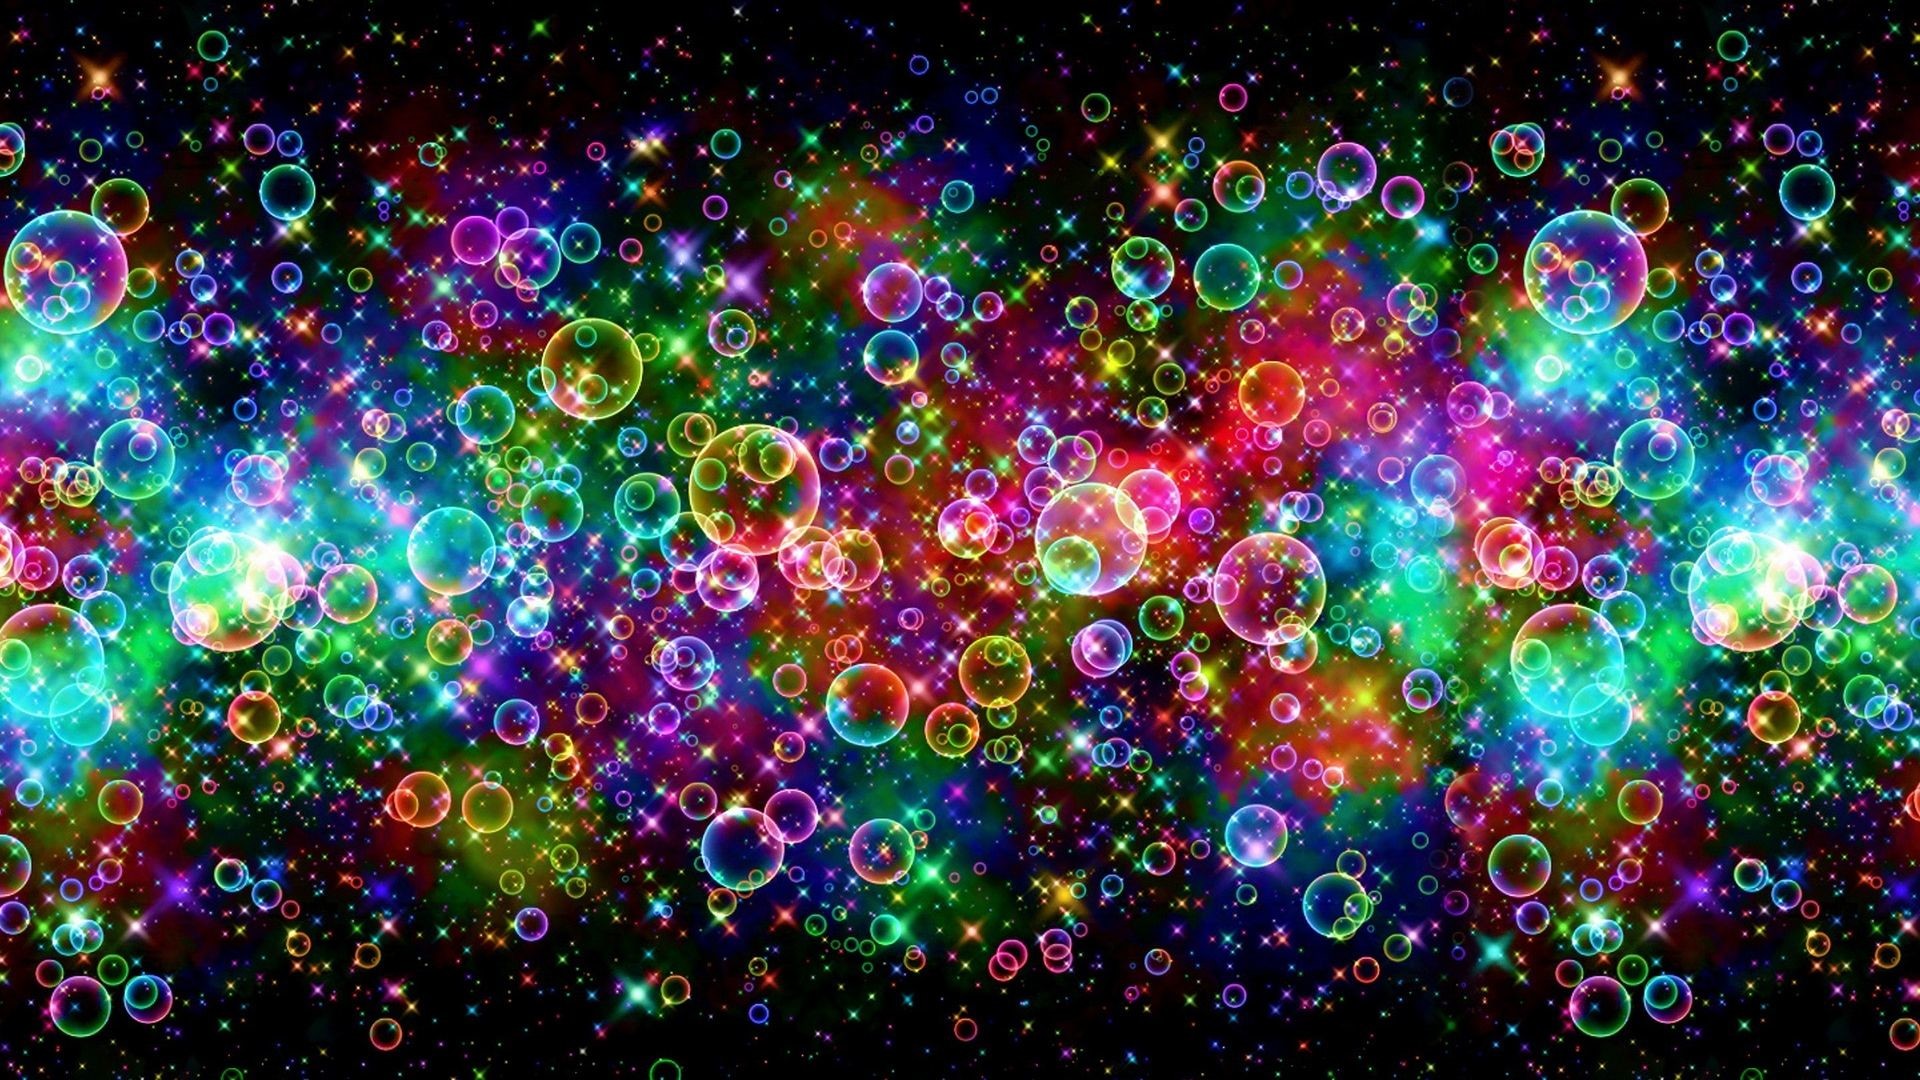 1920x1080 Colorful Bubbles | Colorful Bubbles - HD Wallpapers | Smashing HD Wallpapers